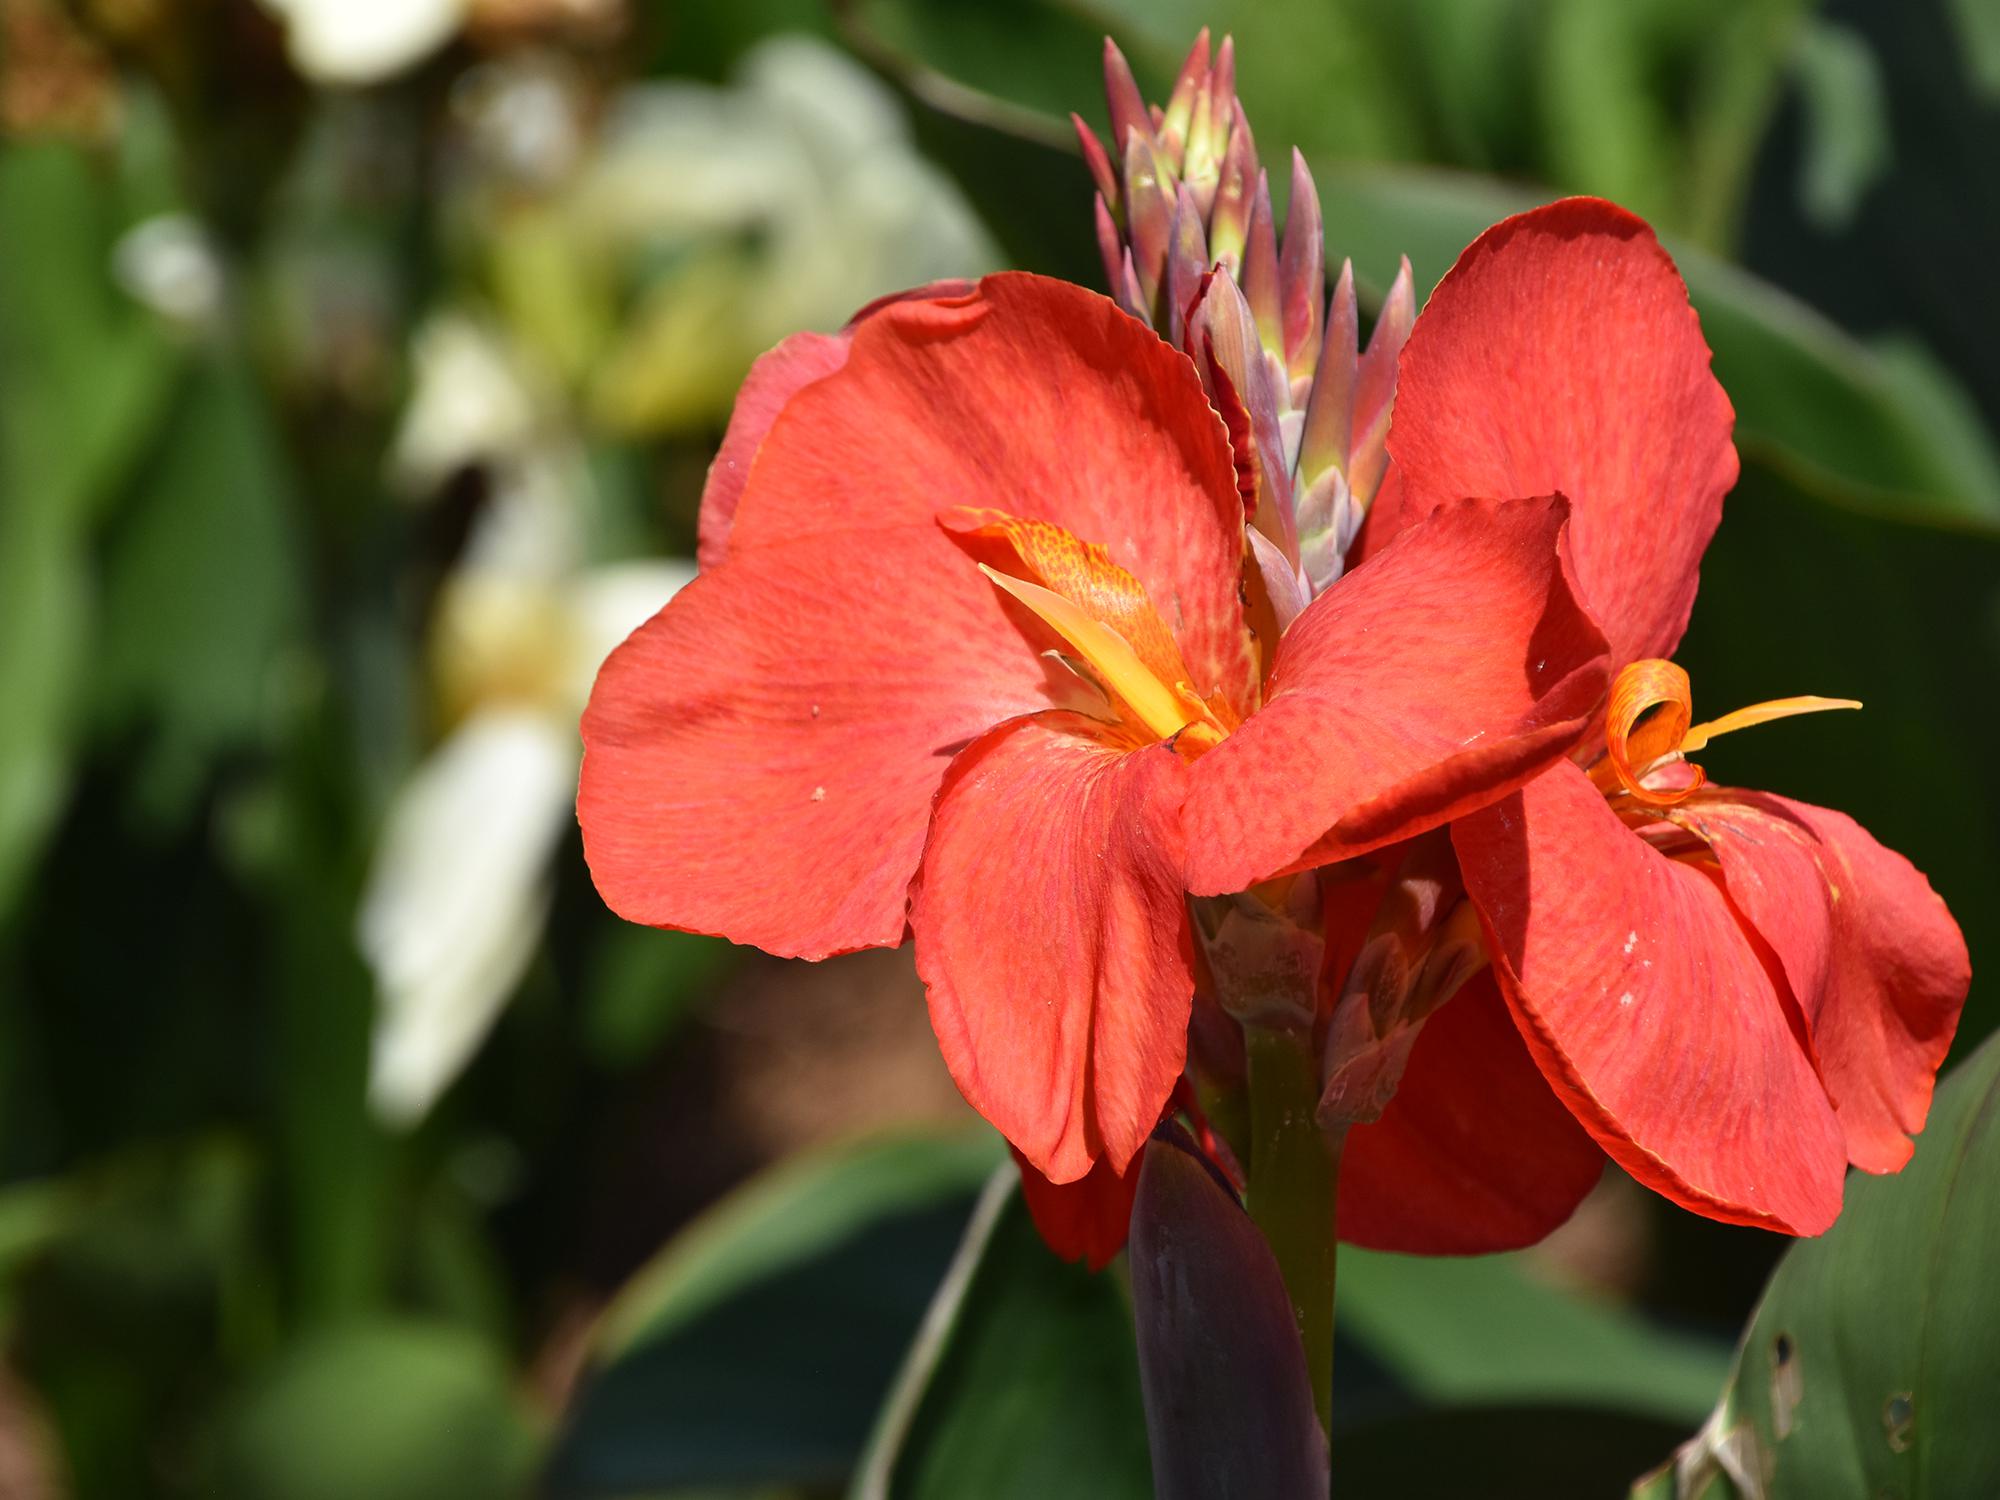 Canna lilies are easy landscape plants for Mississippi gardens. This South Pacific Scarlet is a dwarf selection that can reach 4 feet tall. (Photo by MSU Extension/Gary Bachman)